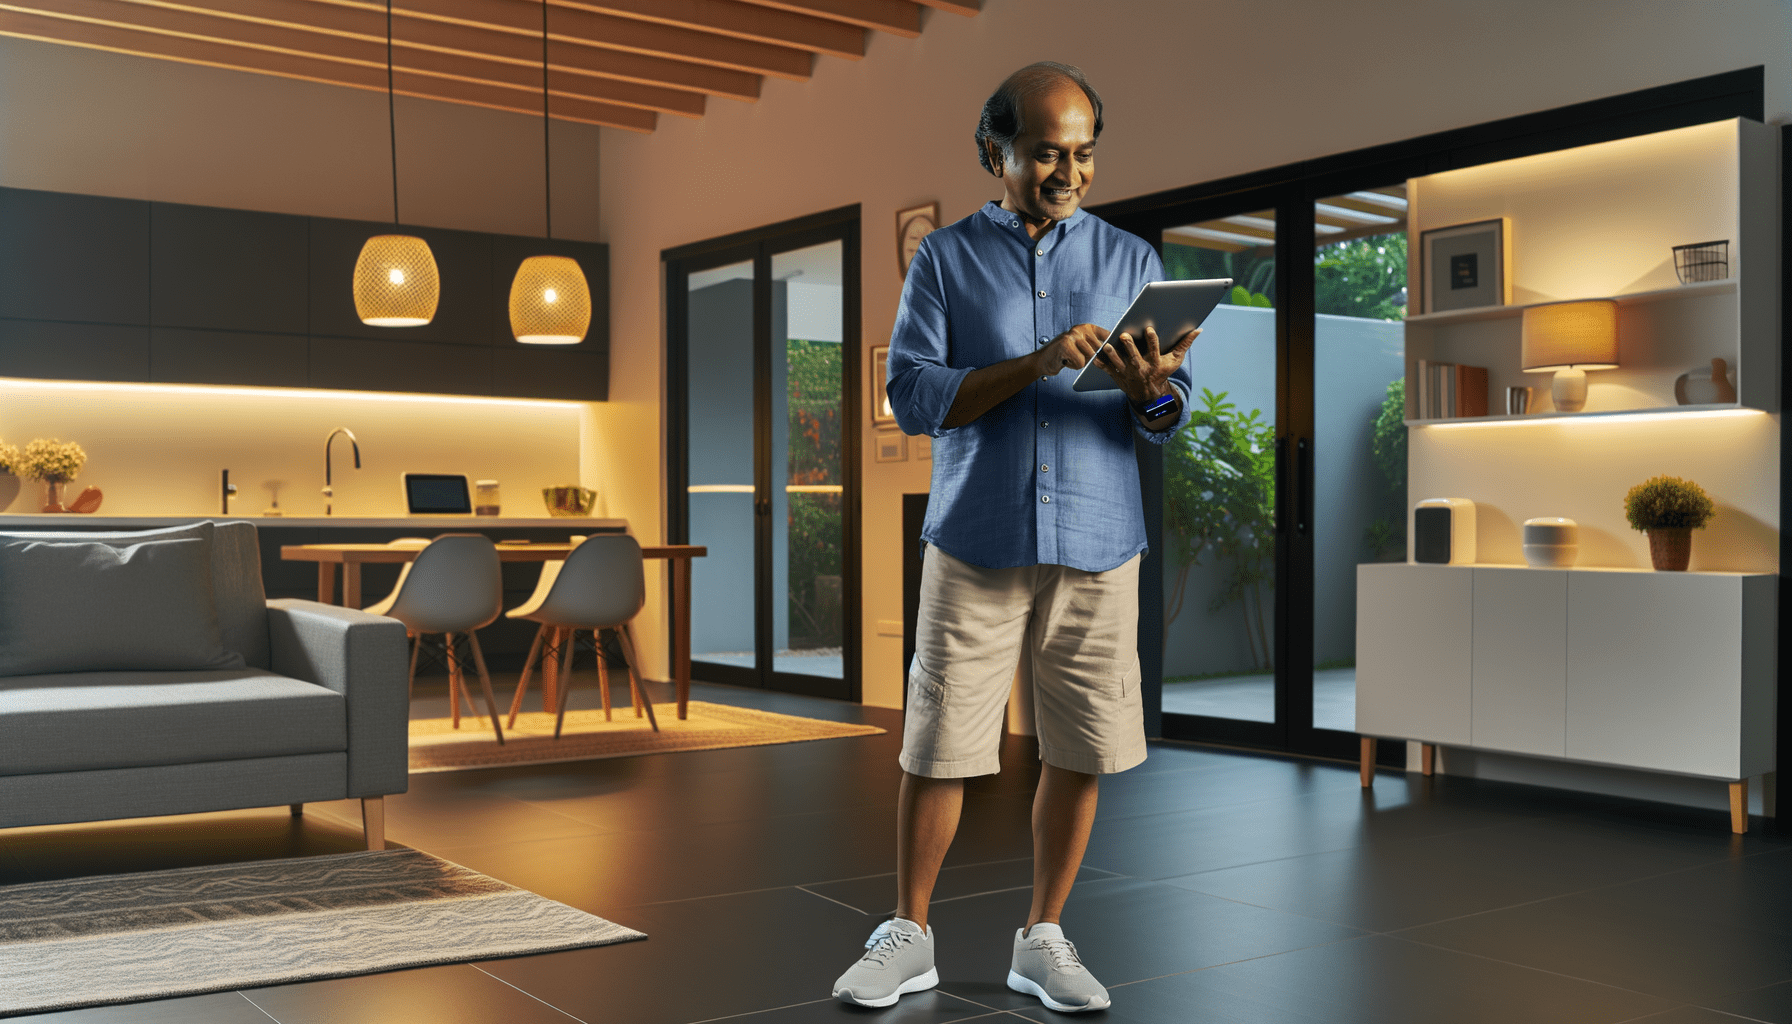 Senior-Friendly Smart Home Tech: Simplifying Your Lifestyle